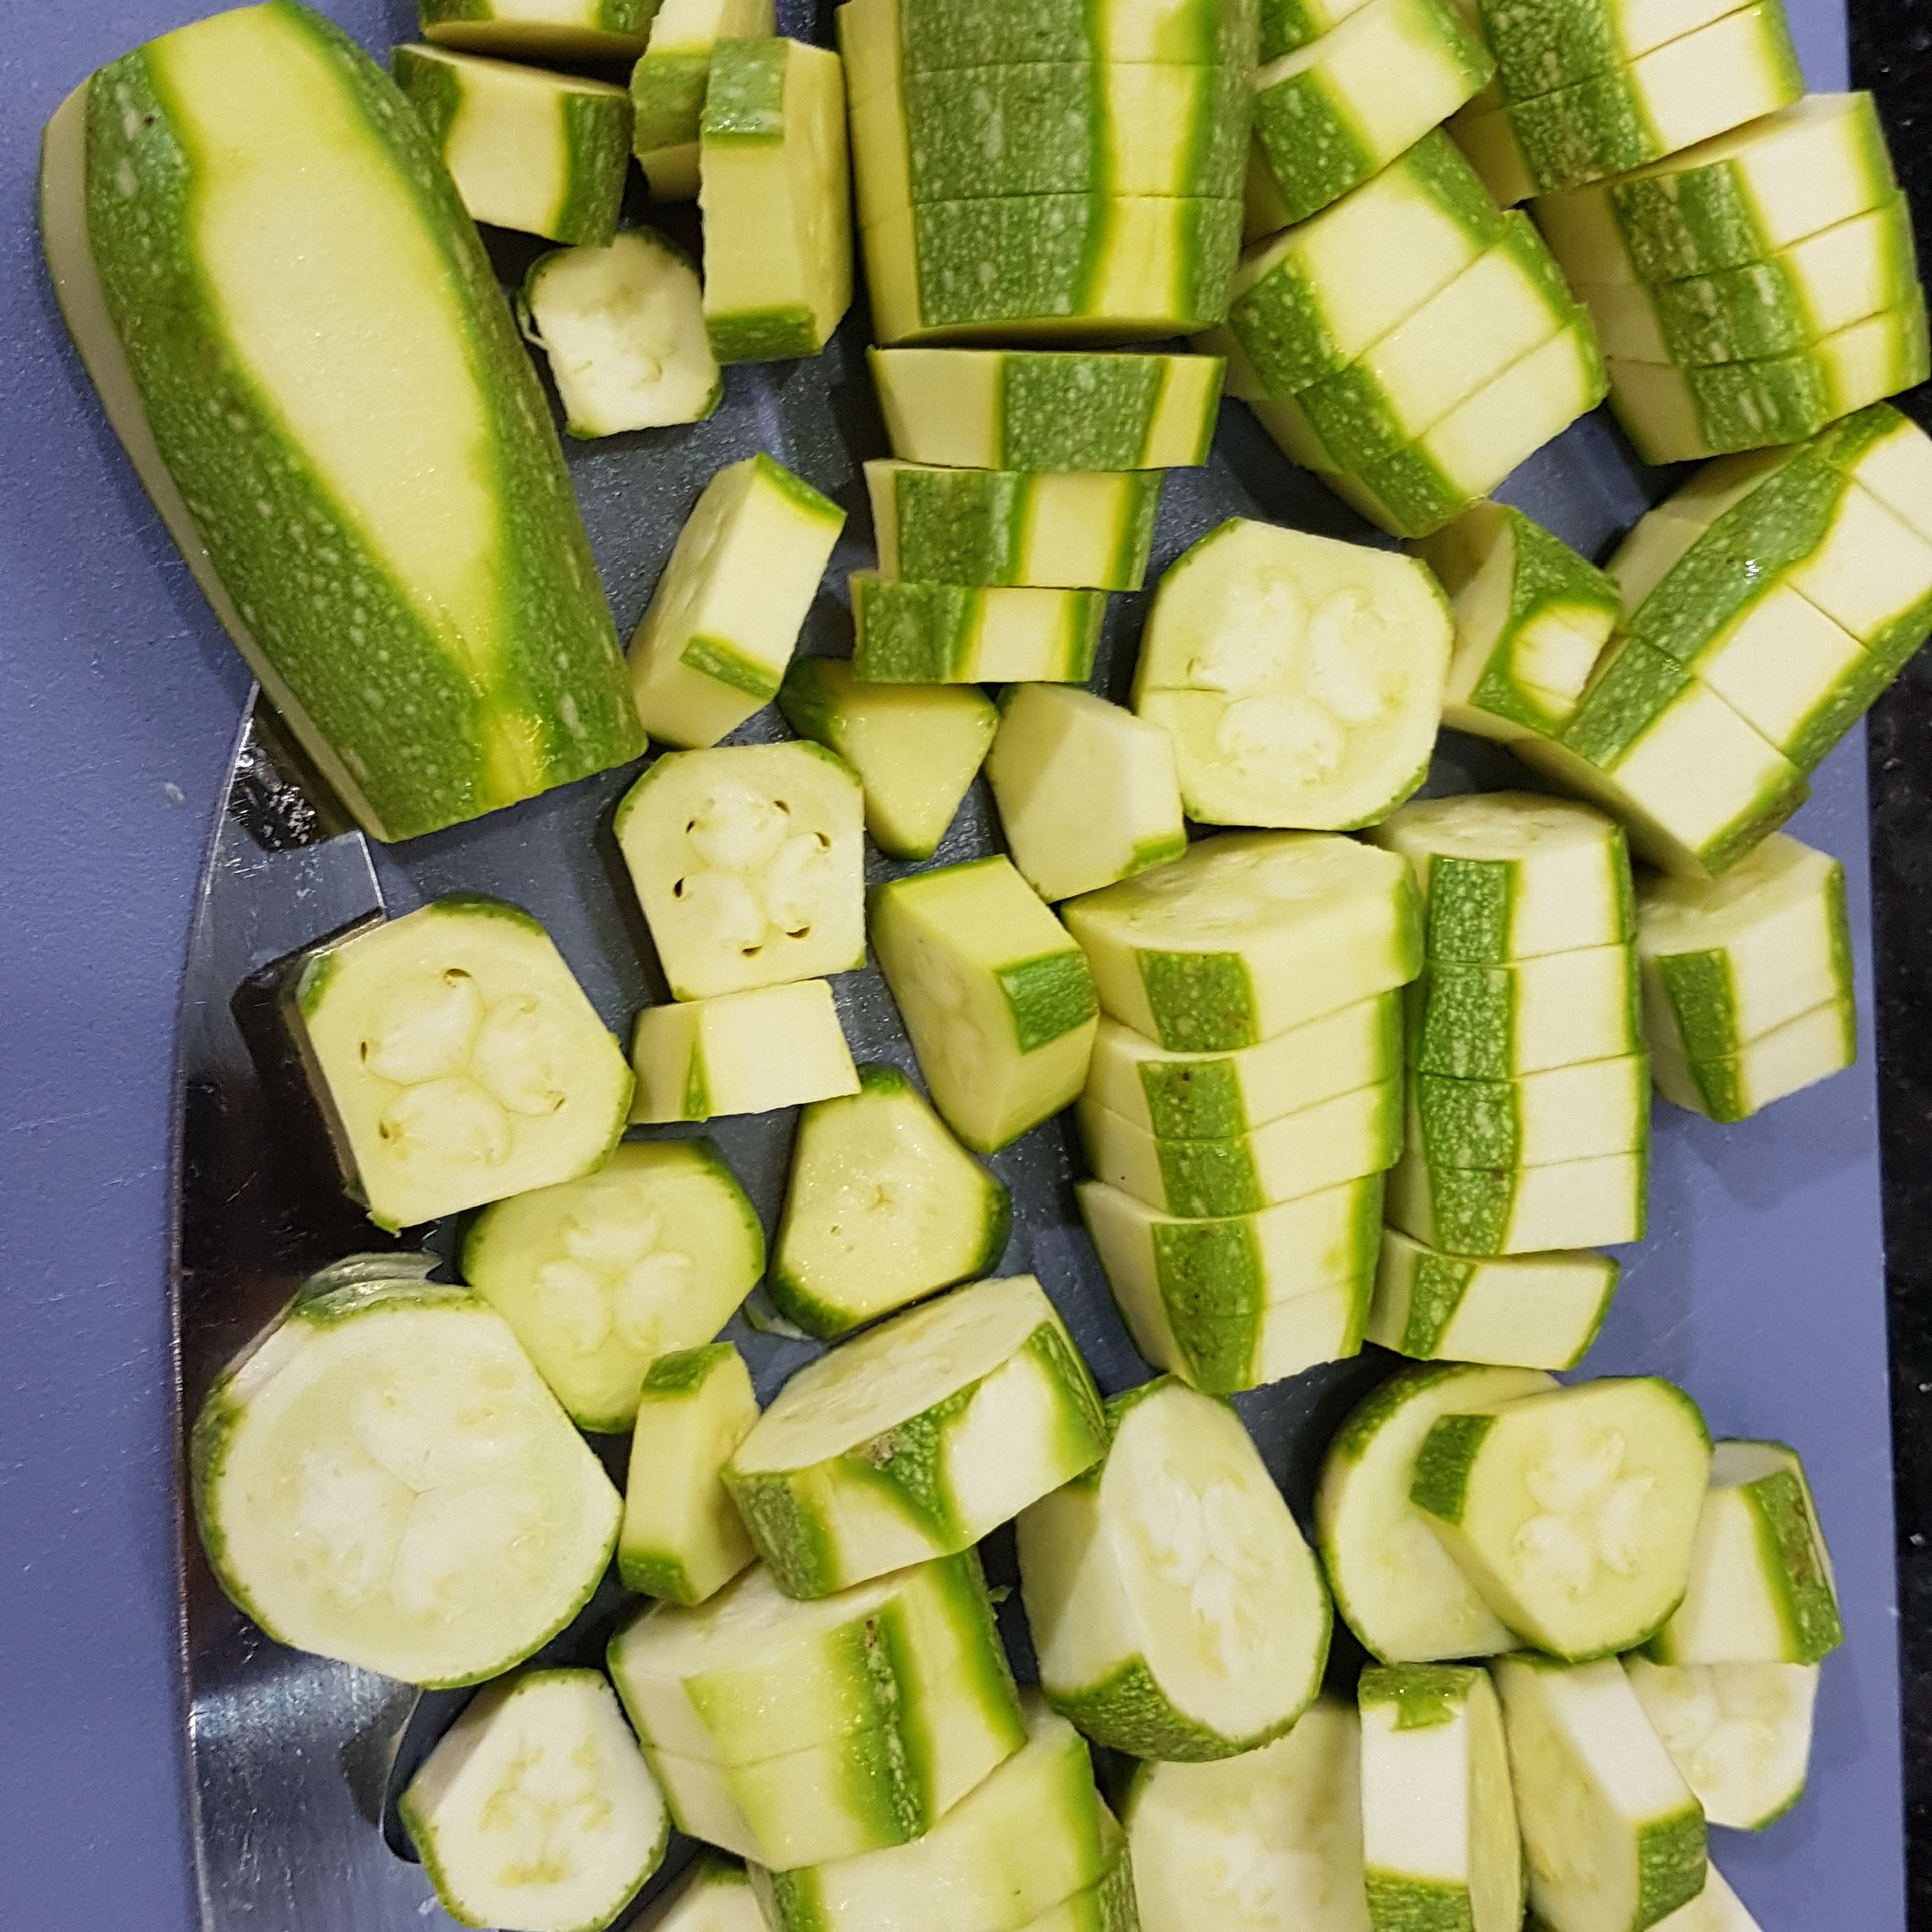 Cut the zucchini into circles. Peeling them is not necessary. Add to the pot and leave on medium heat until halfway done. Stir occasionally.